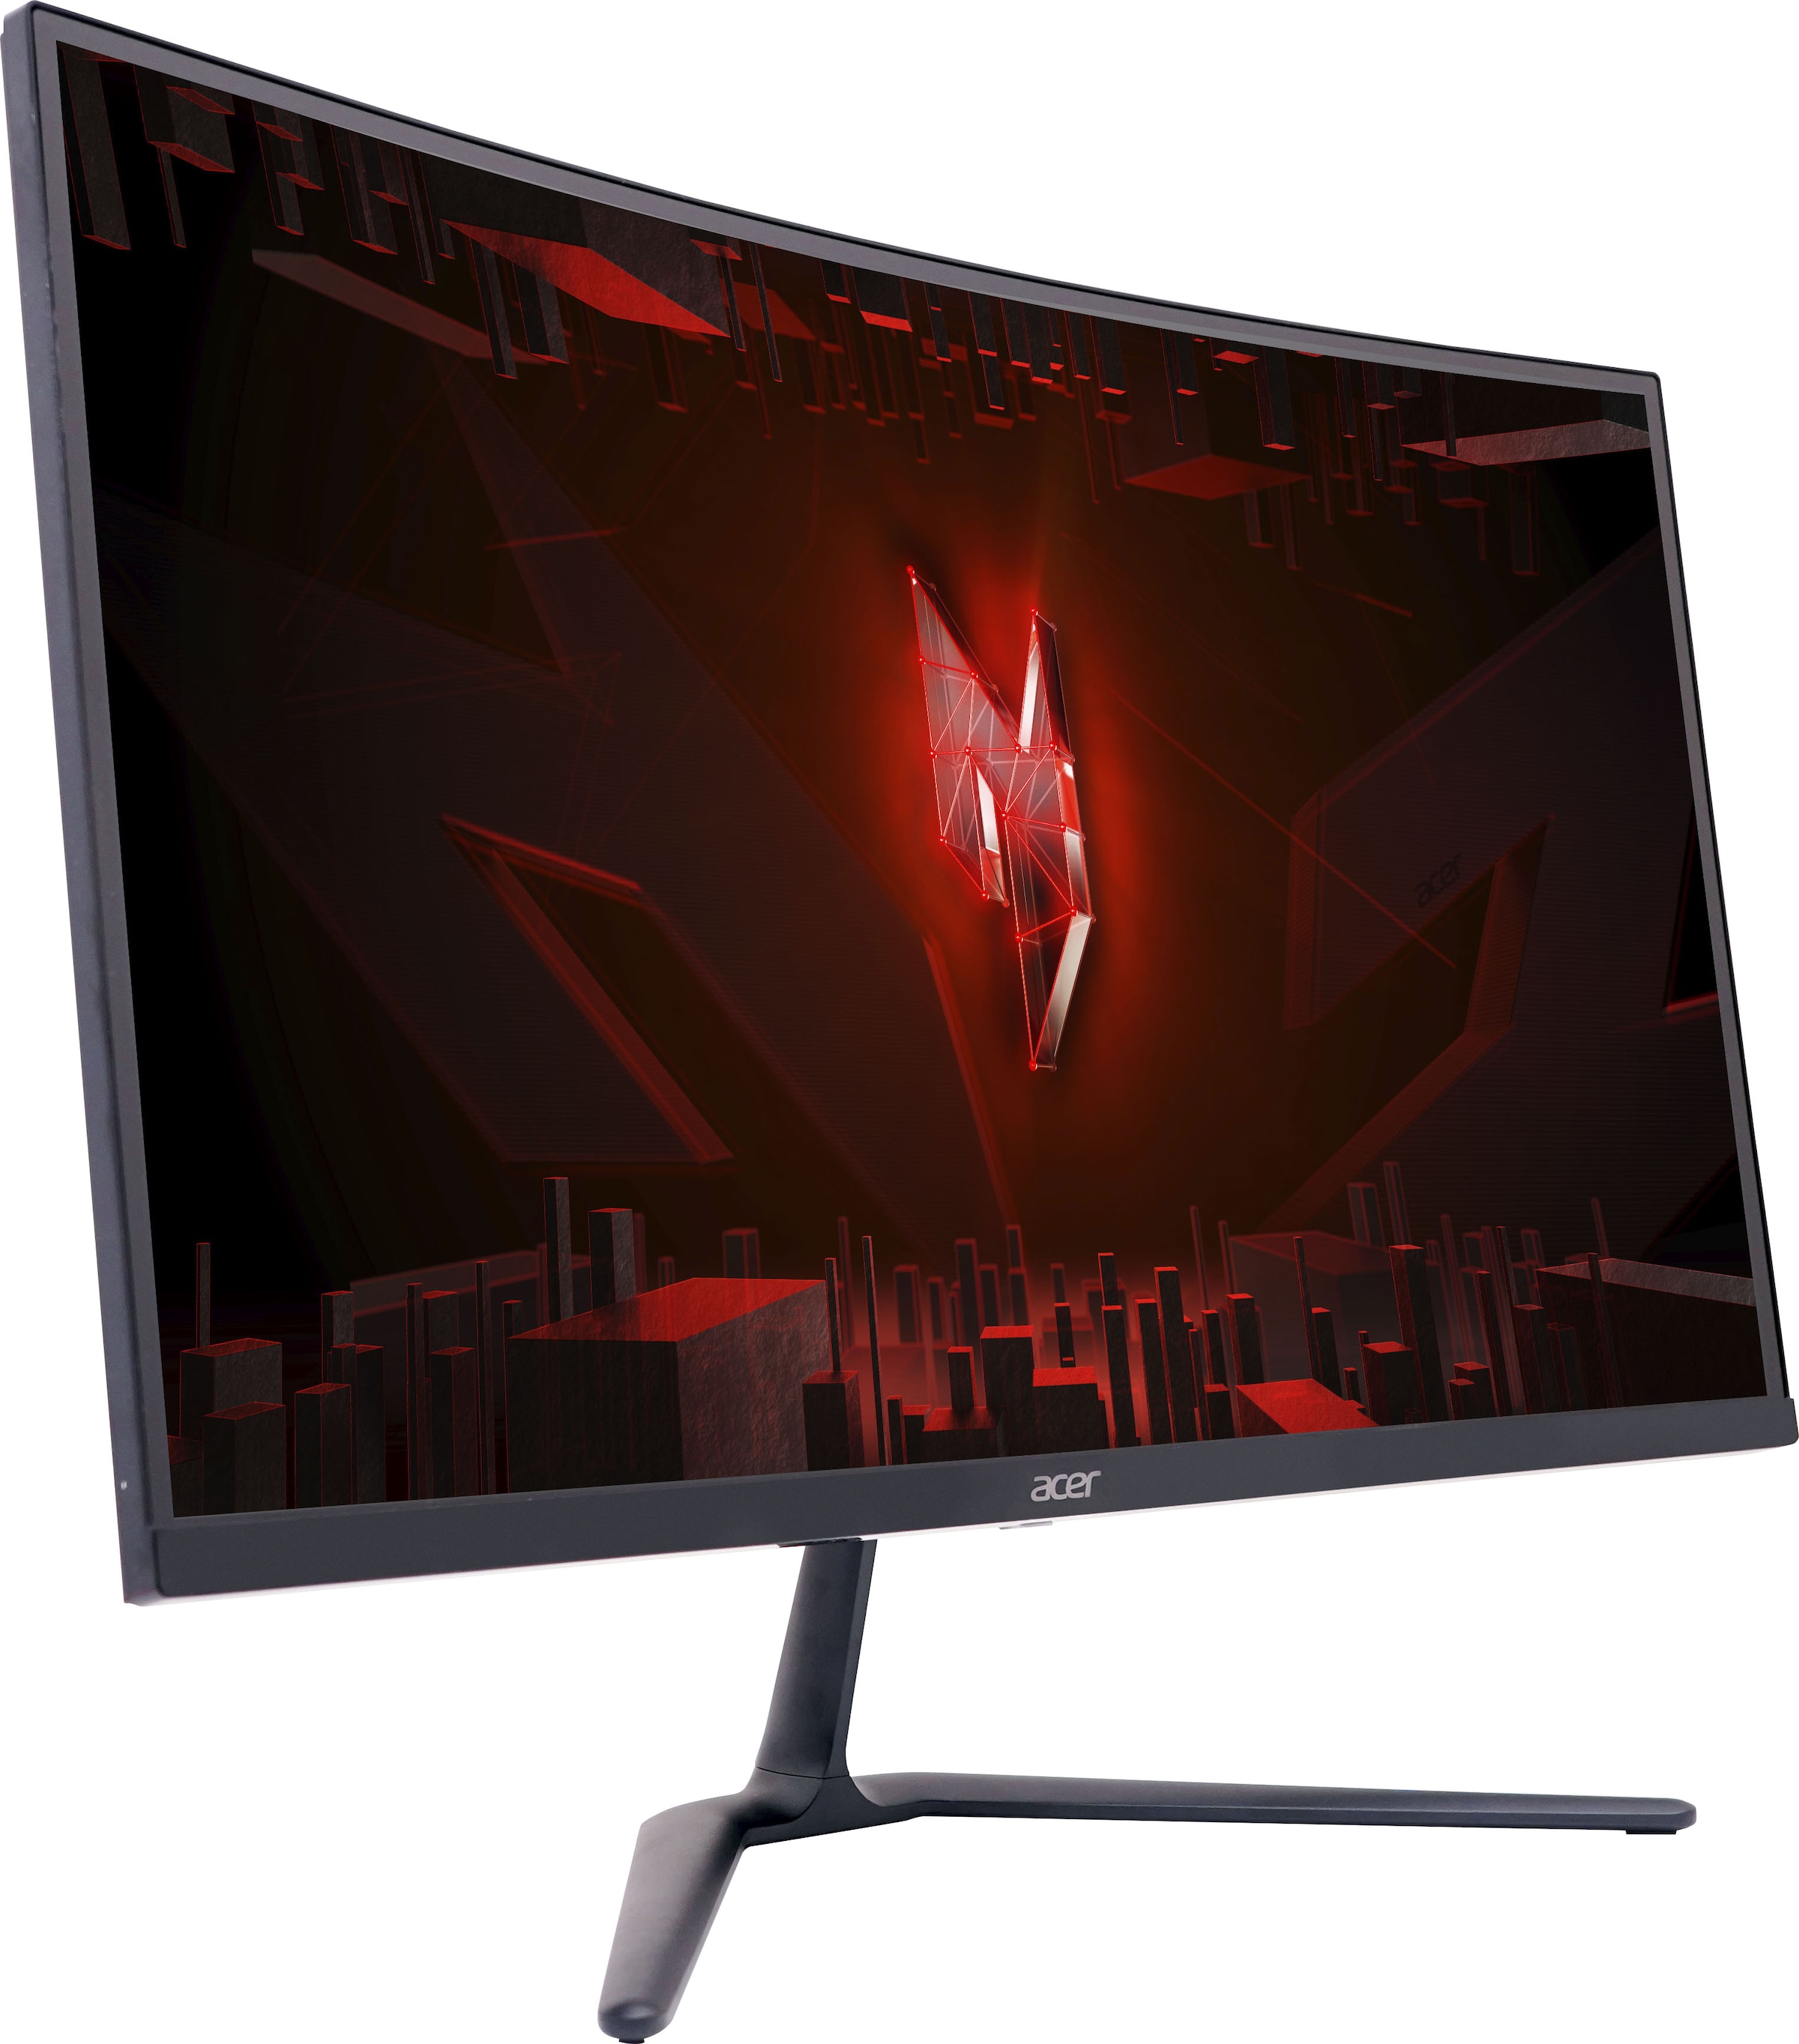 165 ED270R«, 1 bei HD, Full 1080 Zoll, »Nitro jetzt Acer Reaktionszeit, cm/27 1920 Hz Curved-Gaming-LED-Monitor ms online OTTO x 68,6 px,